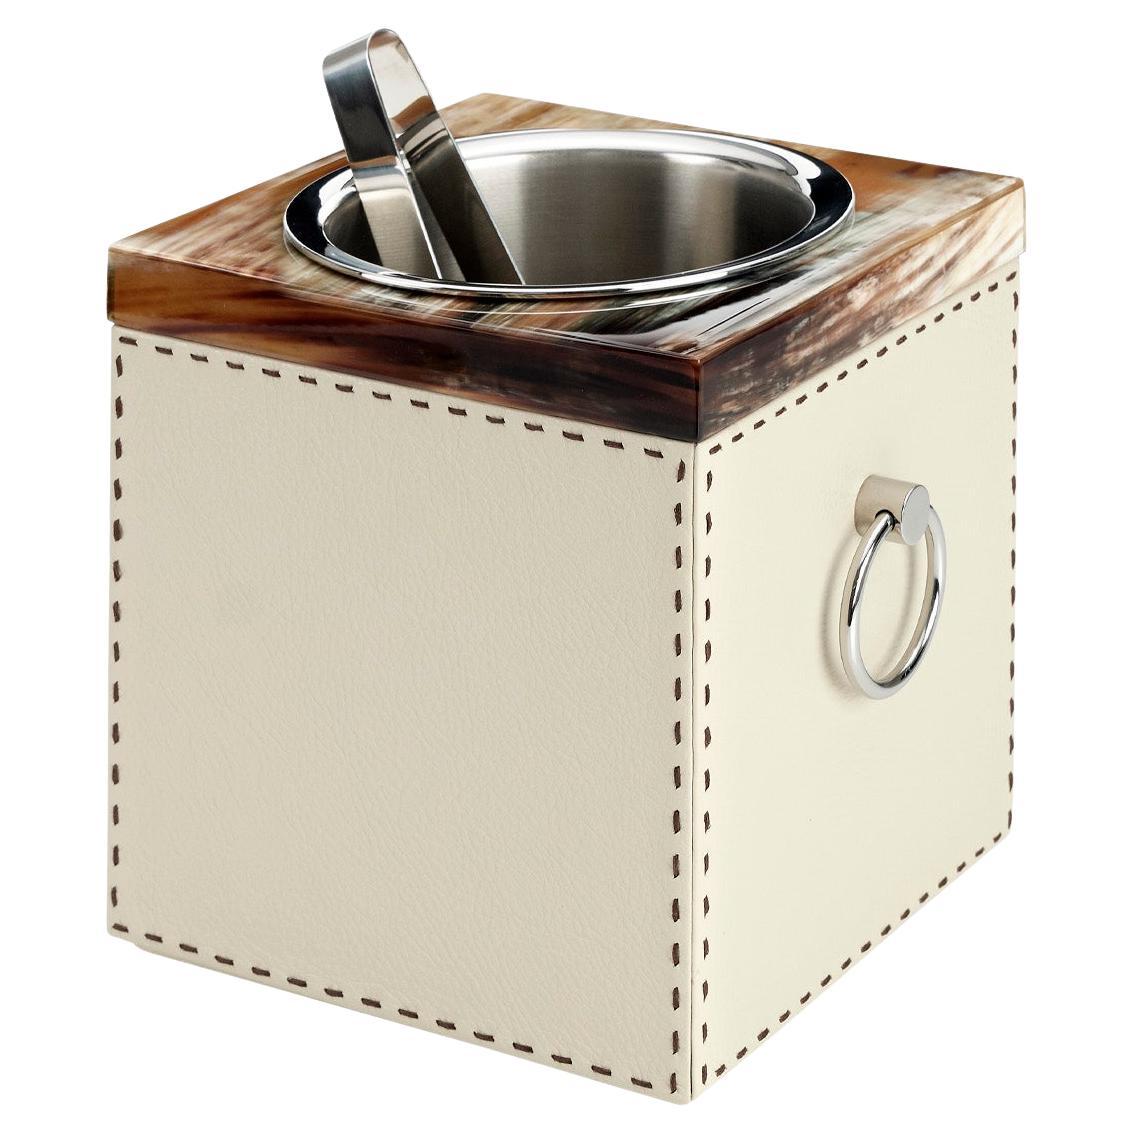 Nives Ice Bucket in Pebbled Leather and Corno Italiano, Mod. 4453 For Sale